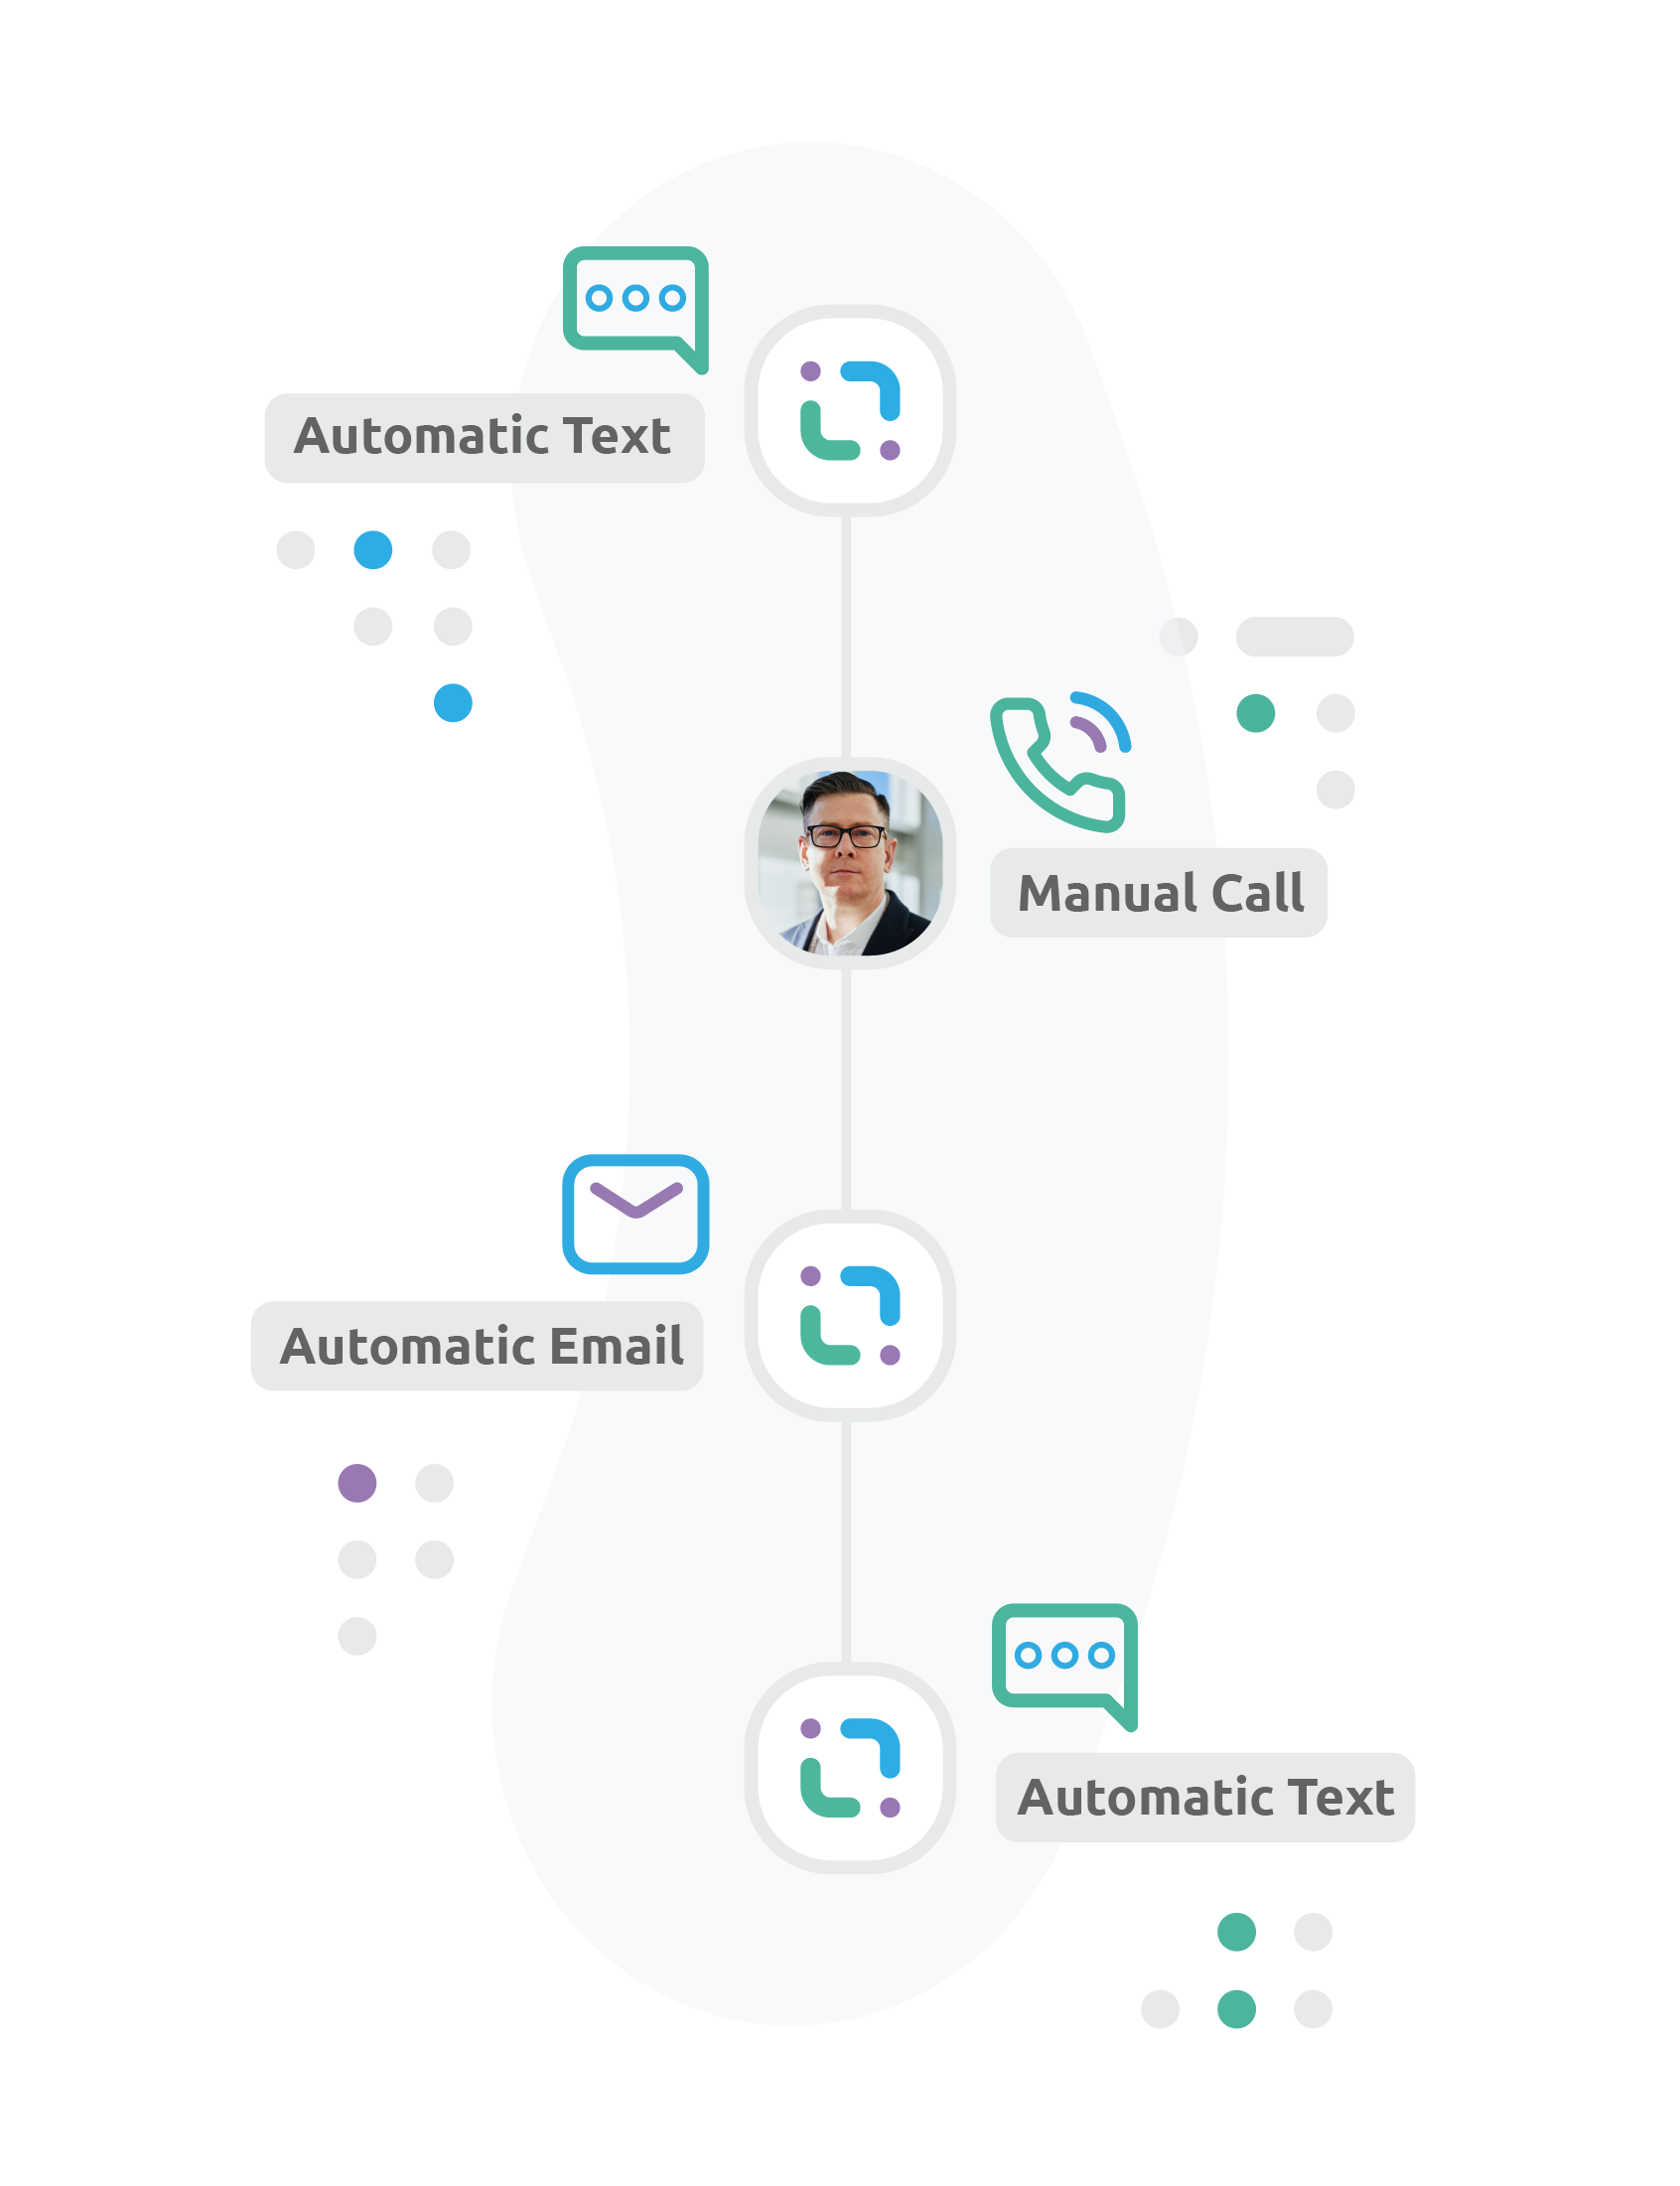 A workflow sequence that shows a series of text messages, emails and manual tasks